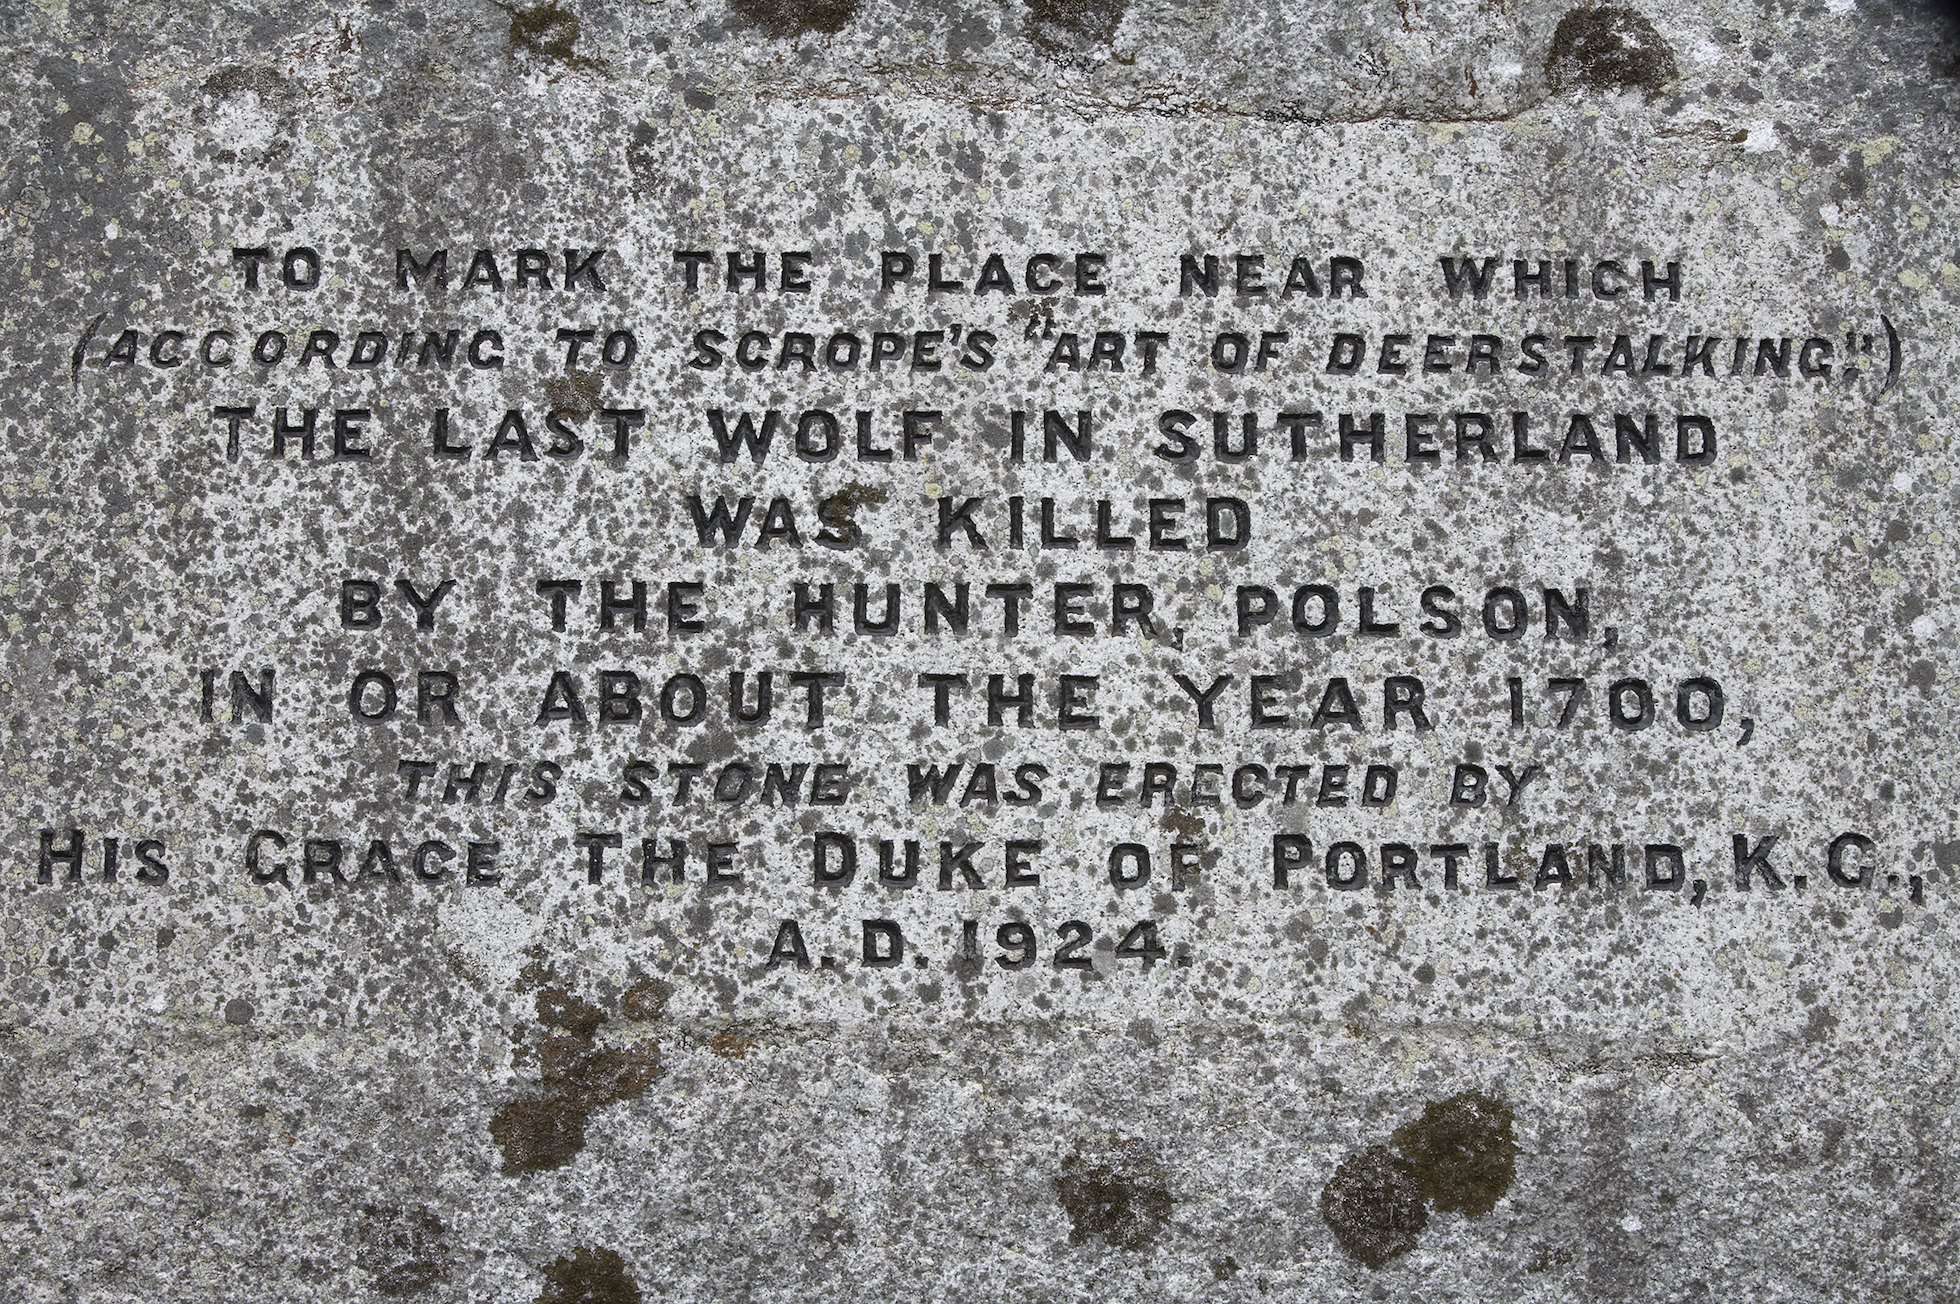 The Polson Stone - marker of alleged last wolf killing in Sutherland, Scotland.